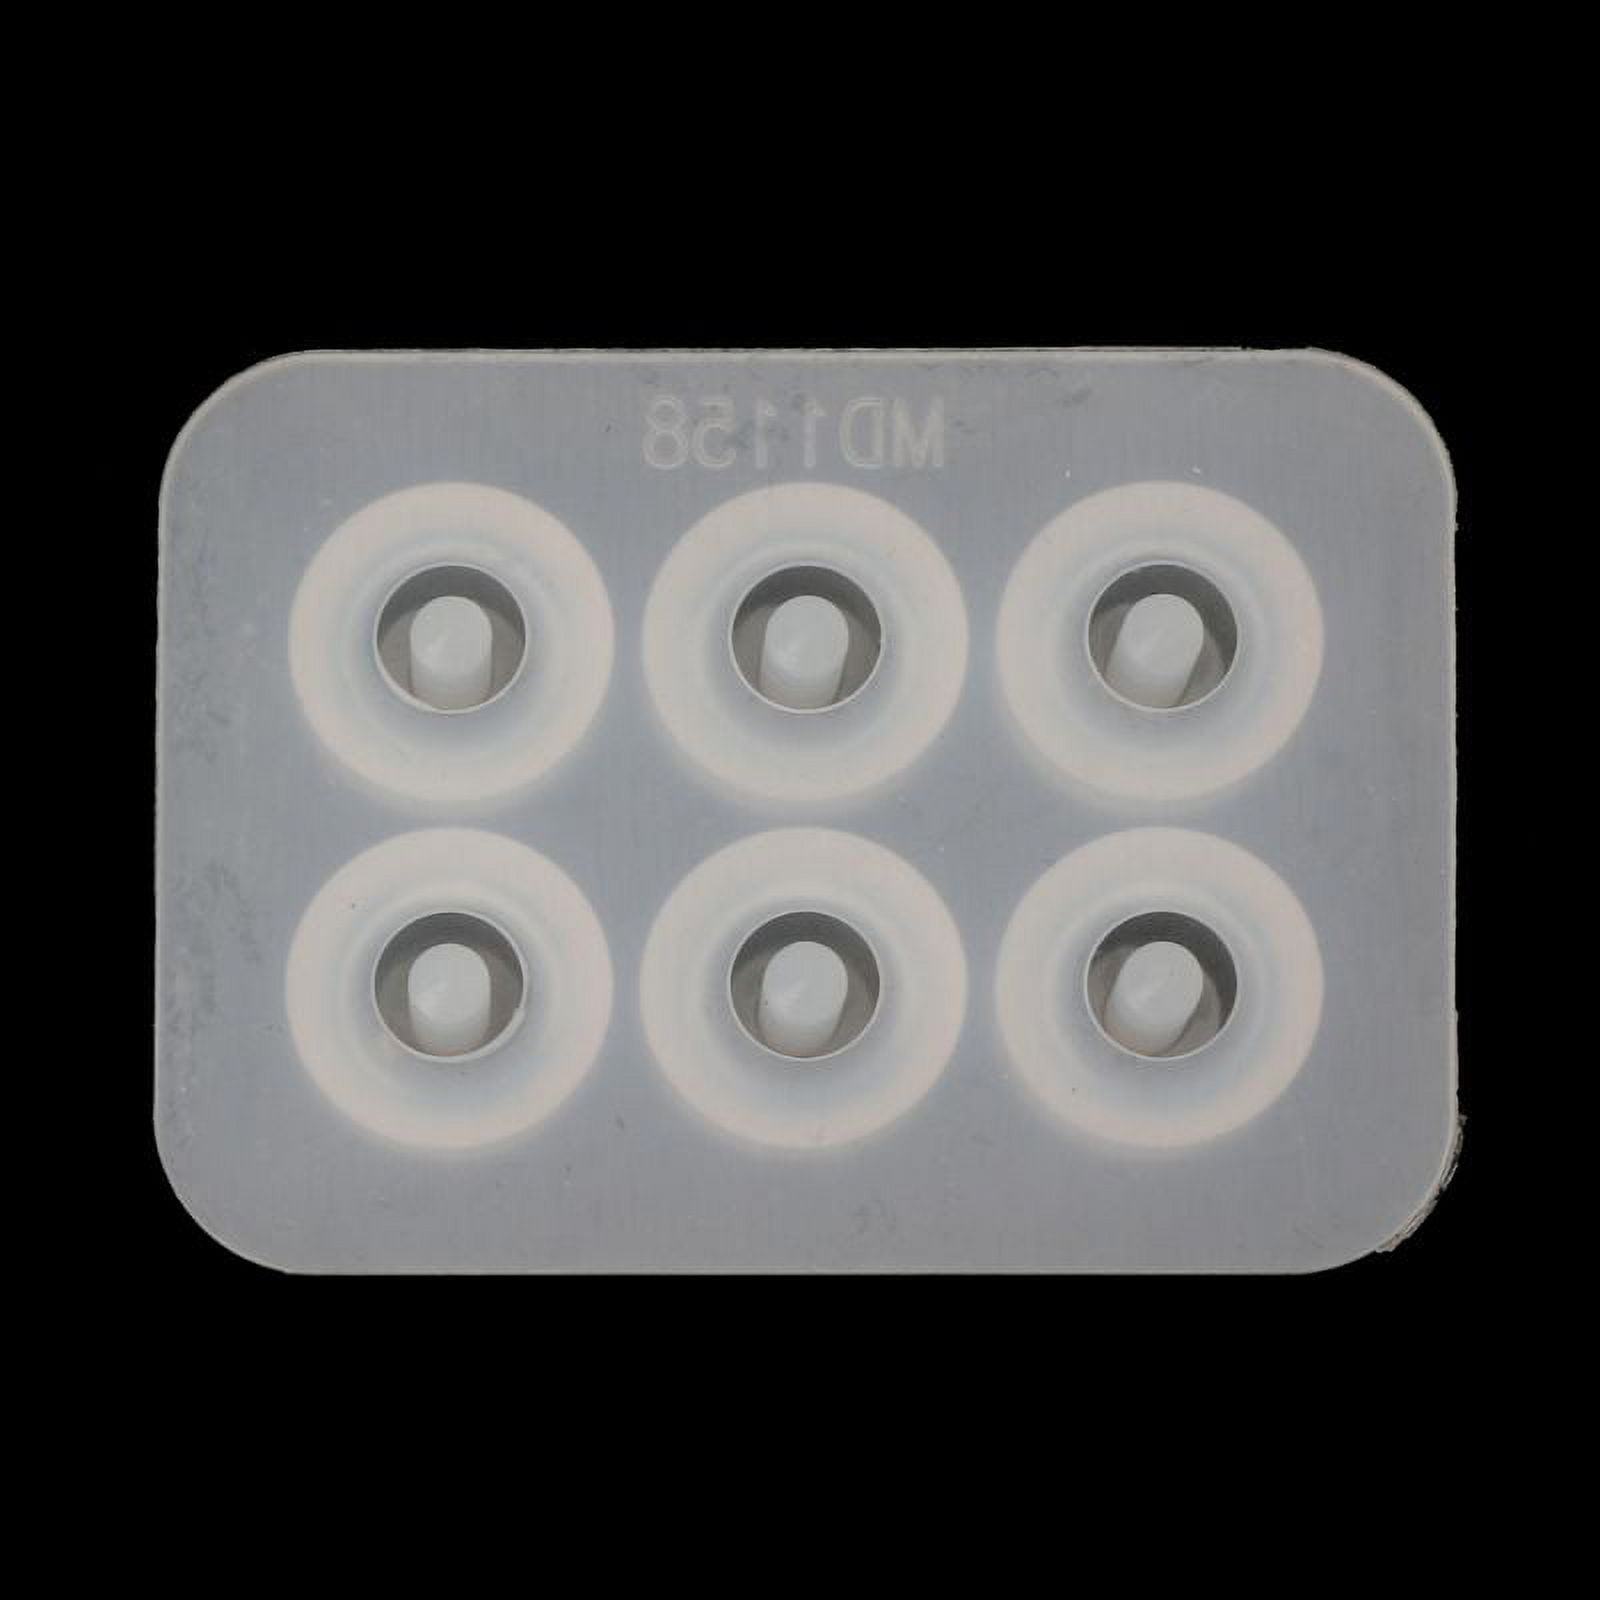 Six Pcs Resin Bead Mold, JiaLe Eggs Ball Silicone Moulds and Square Shapes  Mold Pendant Casting Molds for Gems Bead, Crystals and DIY Jewelry Making